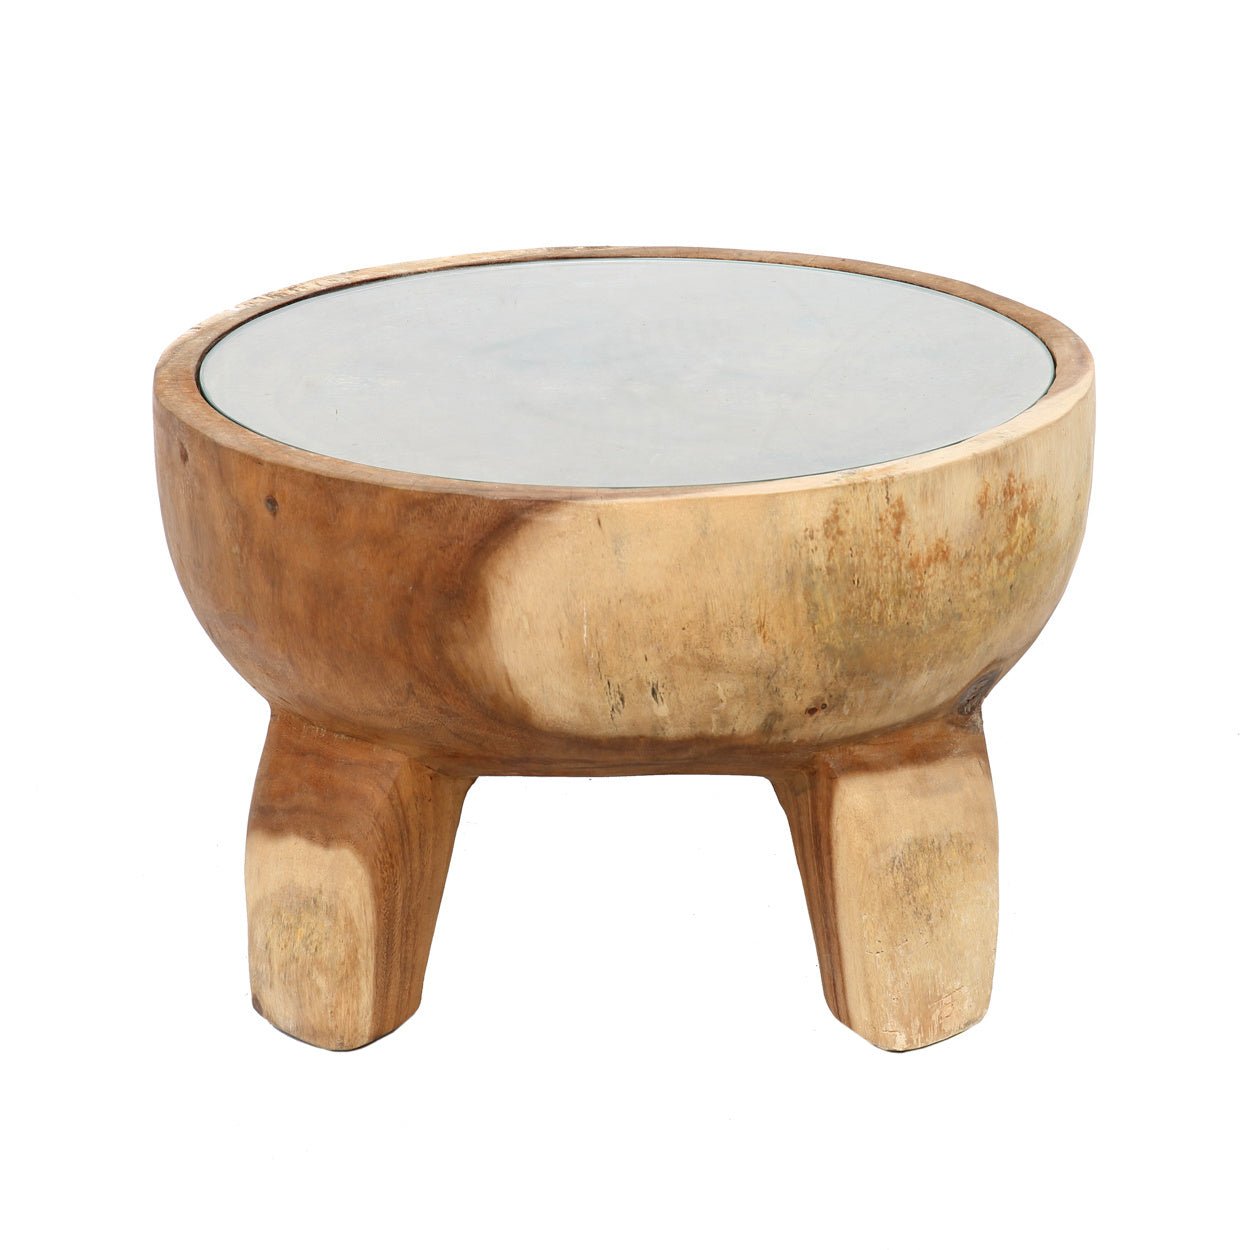 The wooden side table - 55